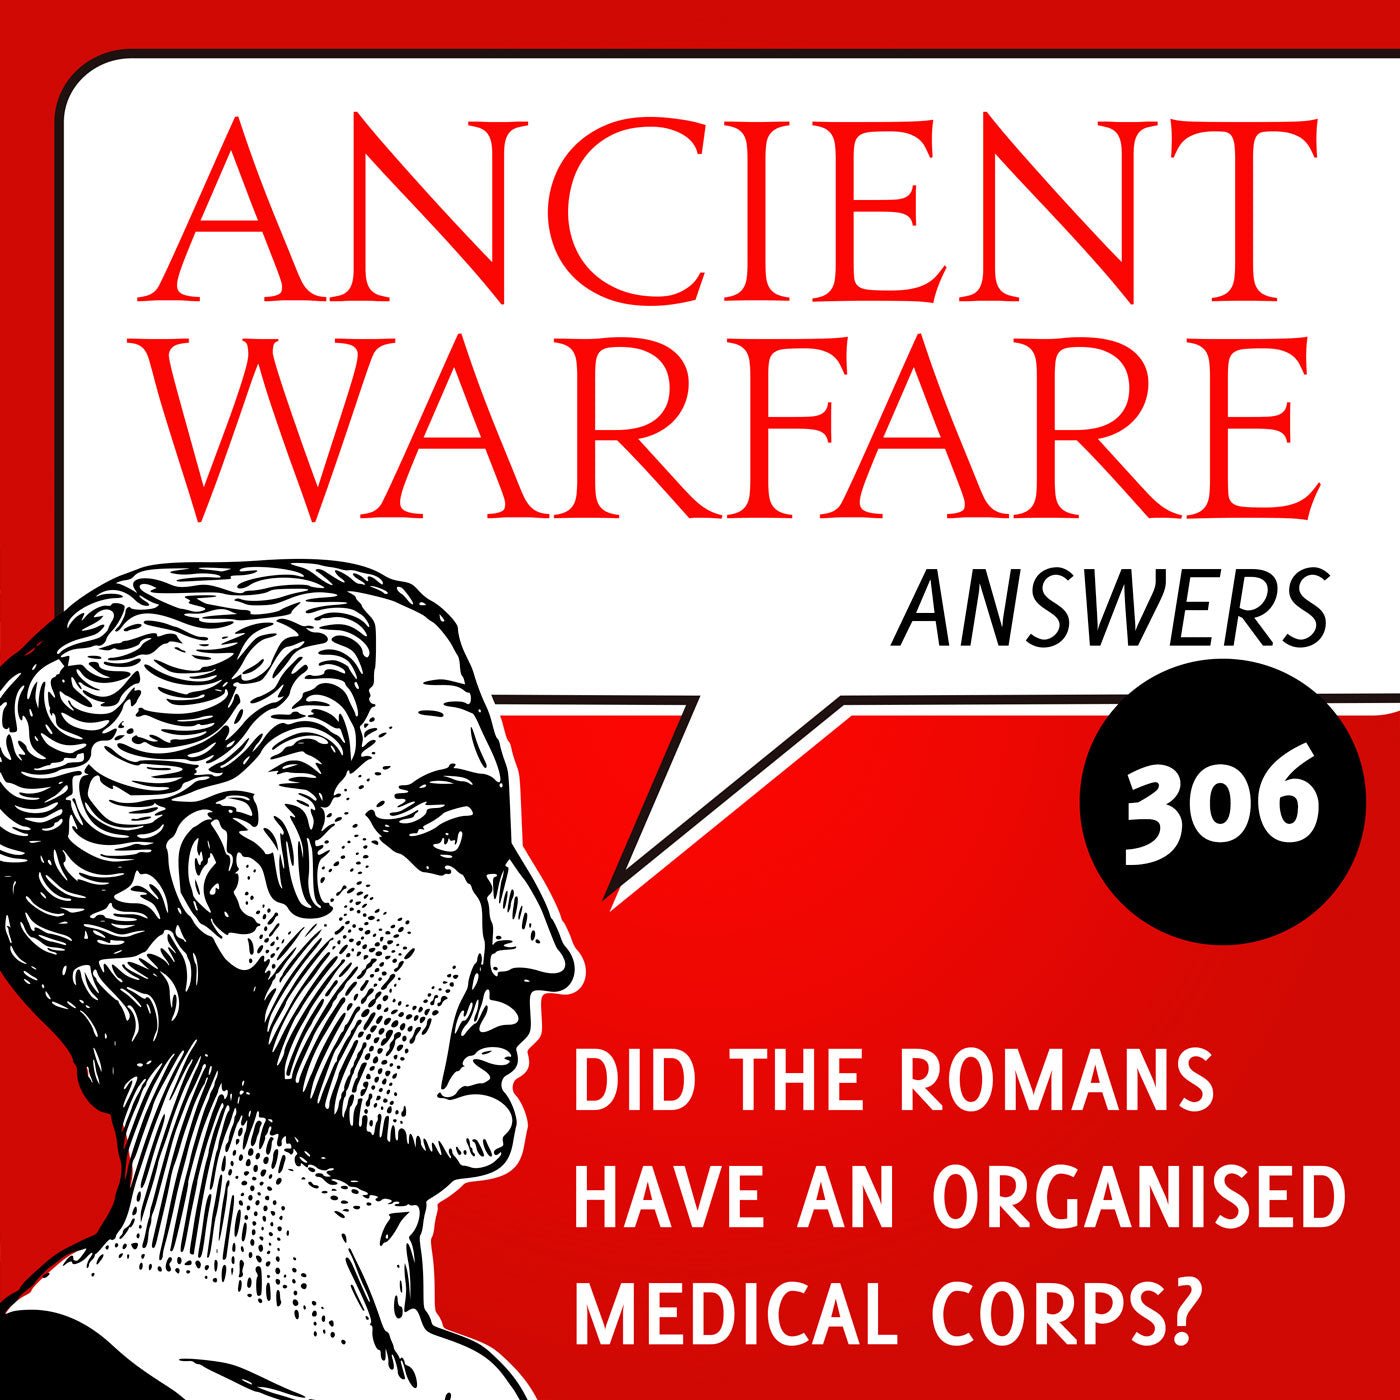 Ancient Warfare Answers (306): Did the Romans have an organised Medical Corps?